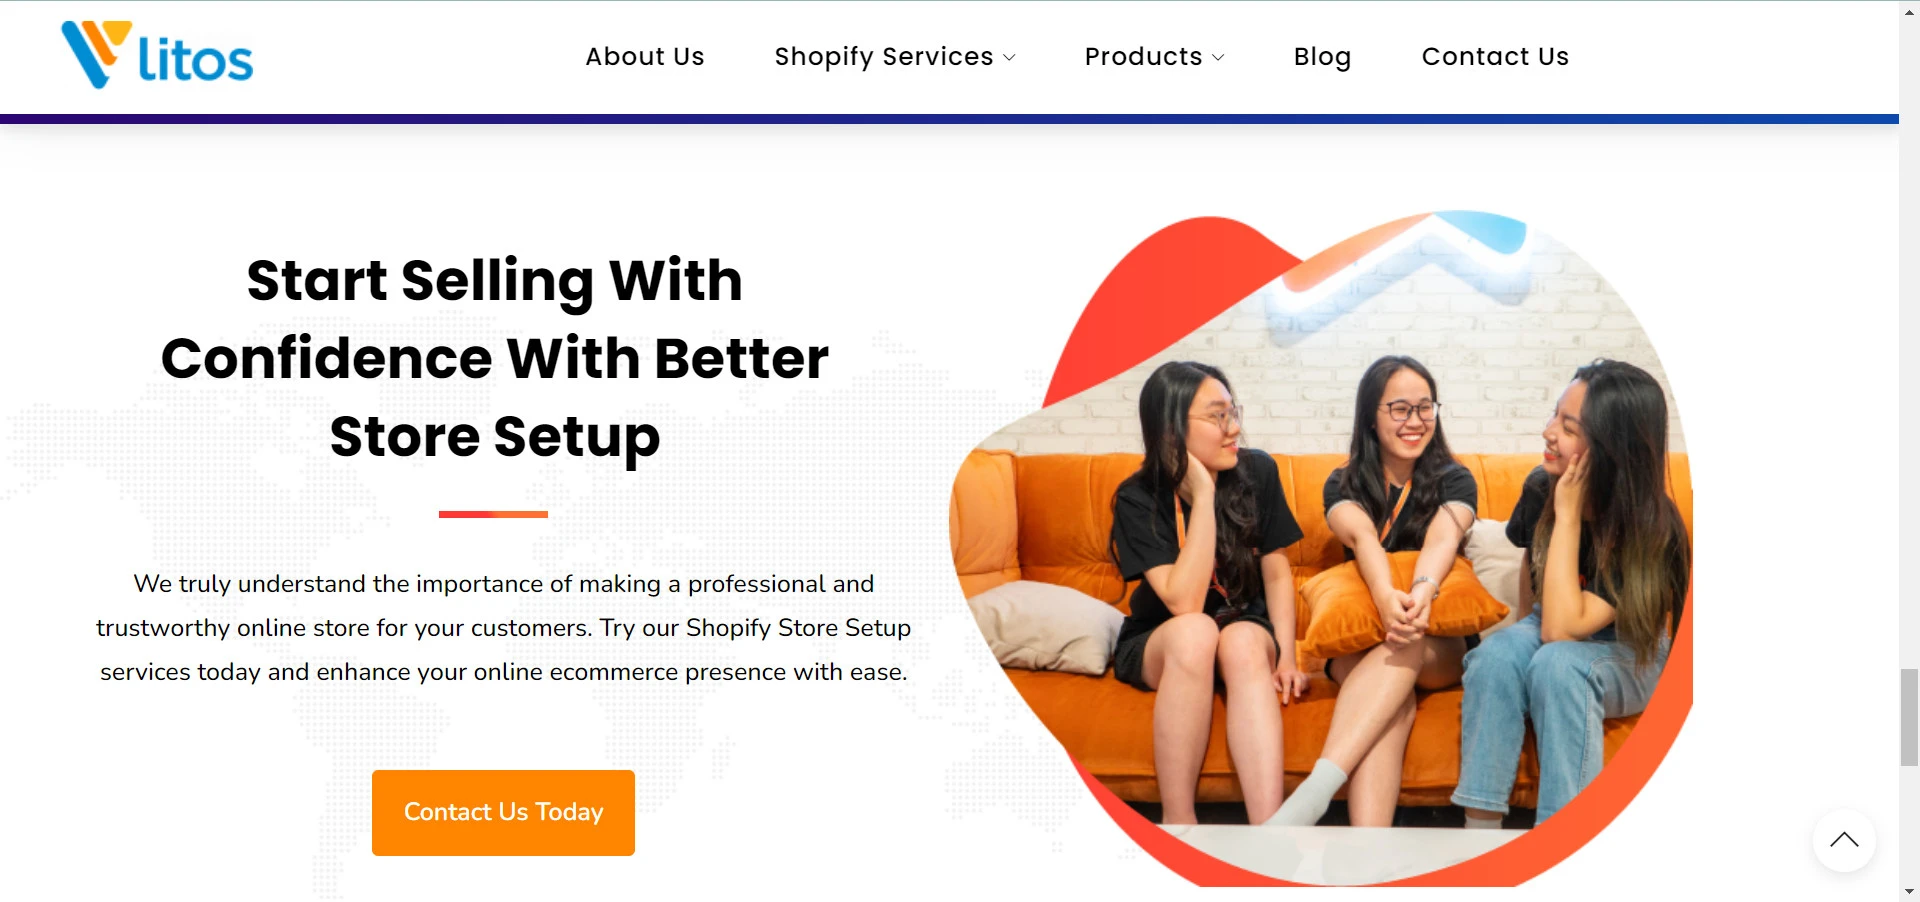 With Litos, you can be worry-free about the complicated process of setting up a Shopify store & customize it